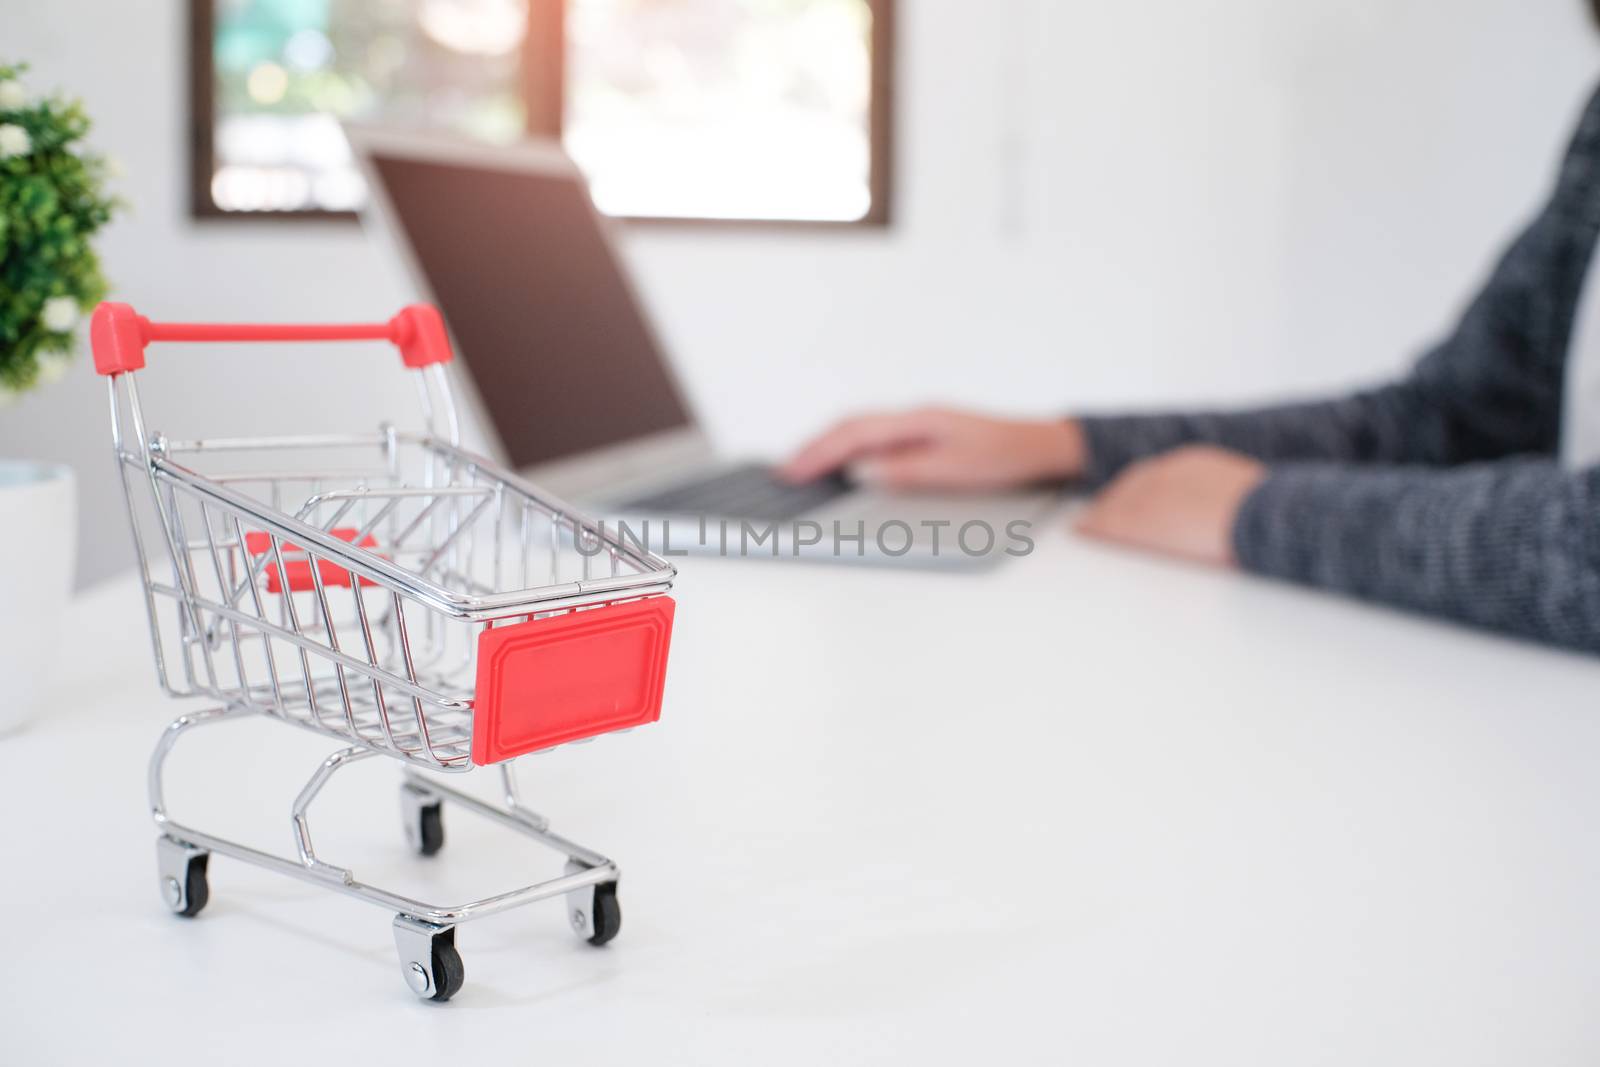 Woman and Small shopping cart with Laptop for Internet online shopping concept.